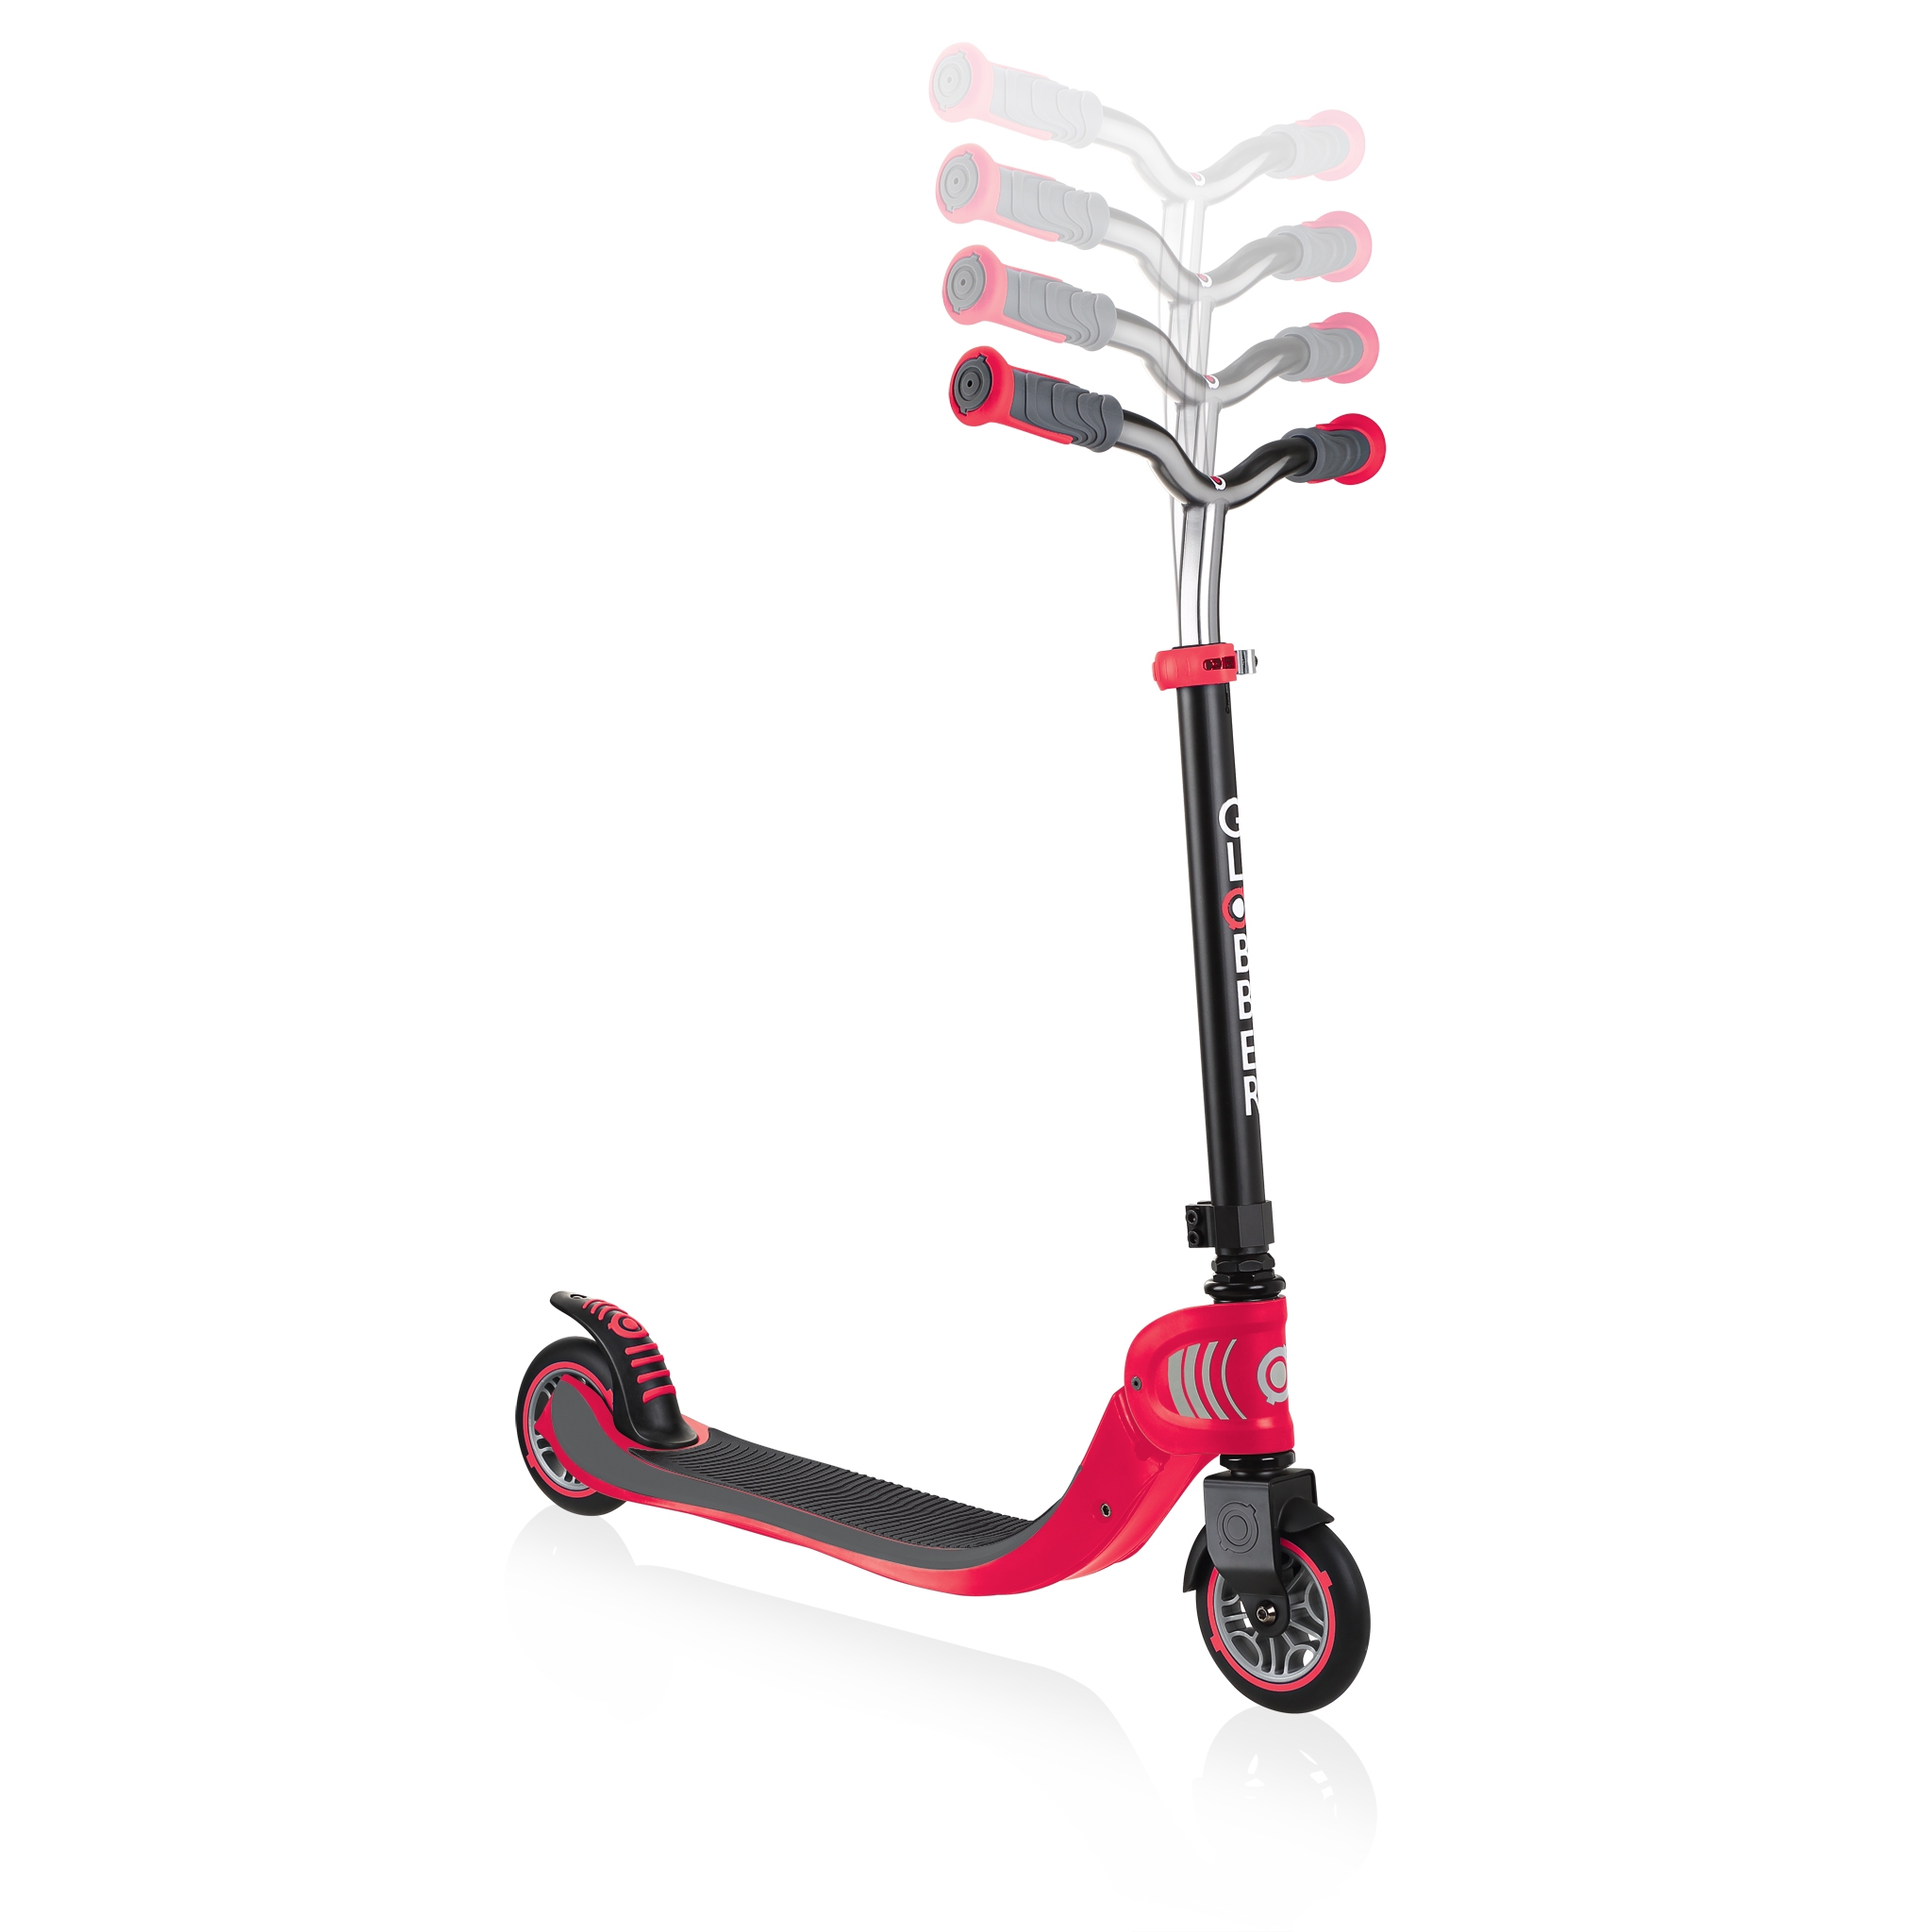 FLOW-FOLDABLE-125-2-wheel-scooter-for-kids-with-adjustable-t-bar-new-red 2